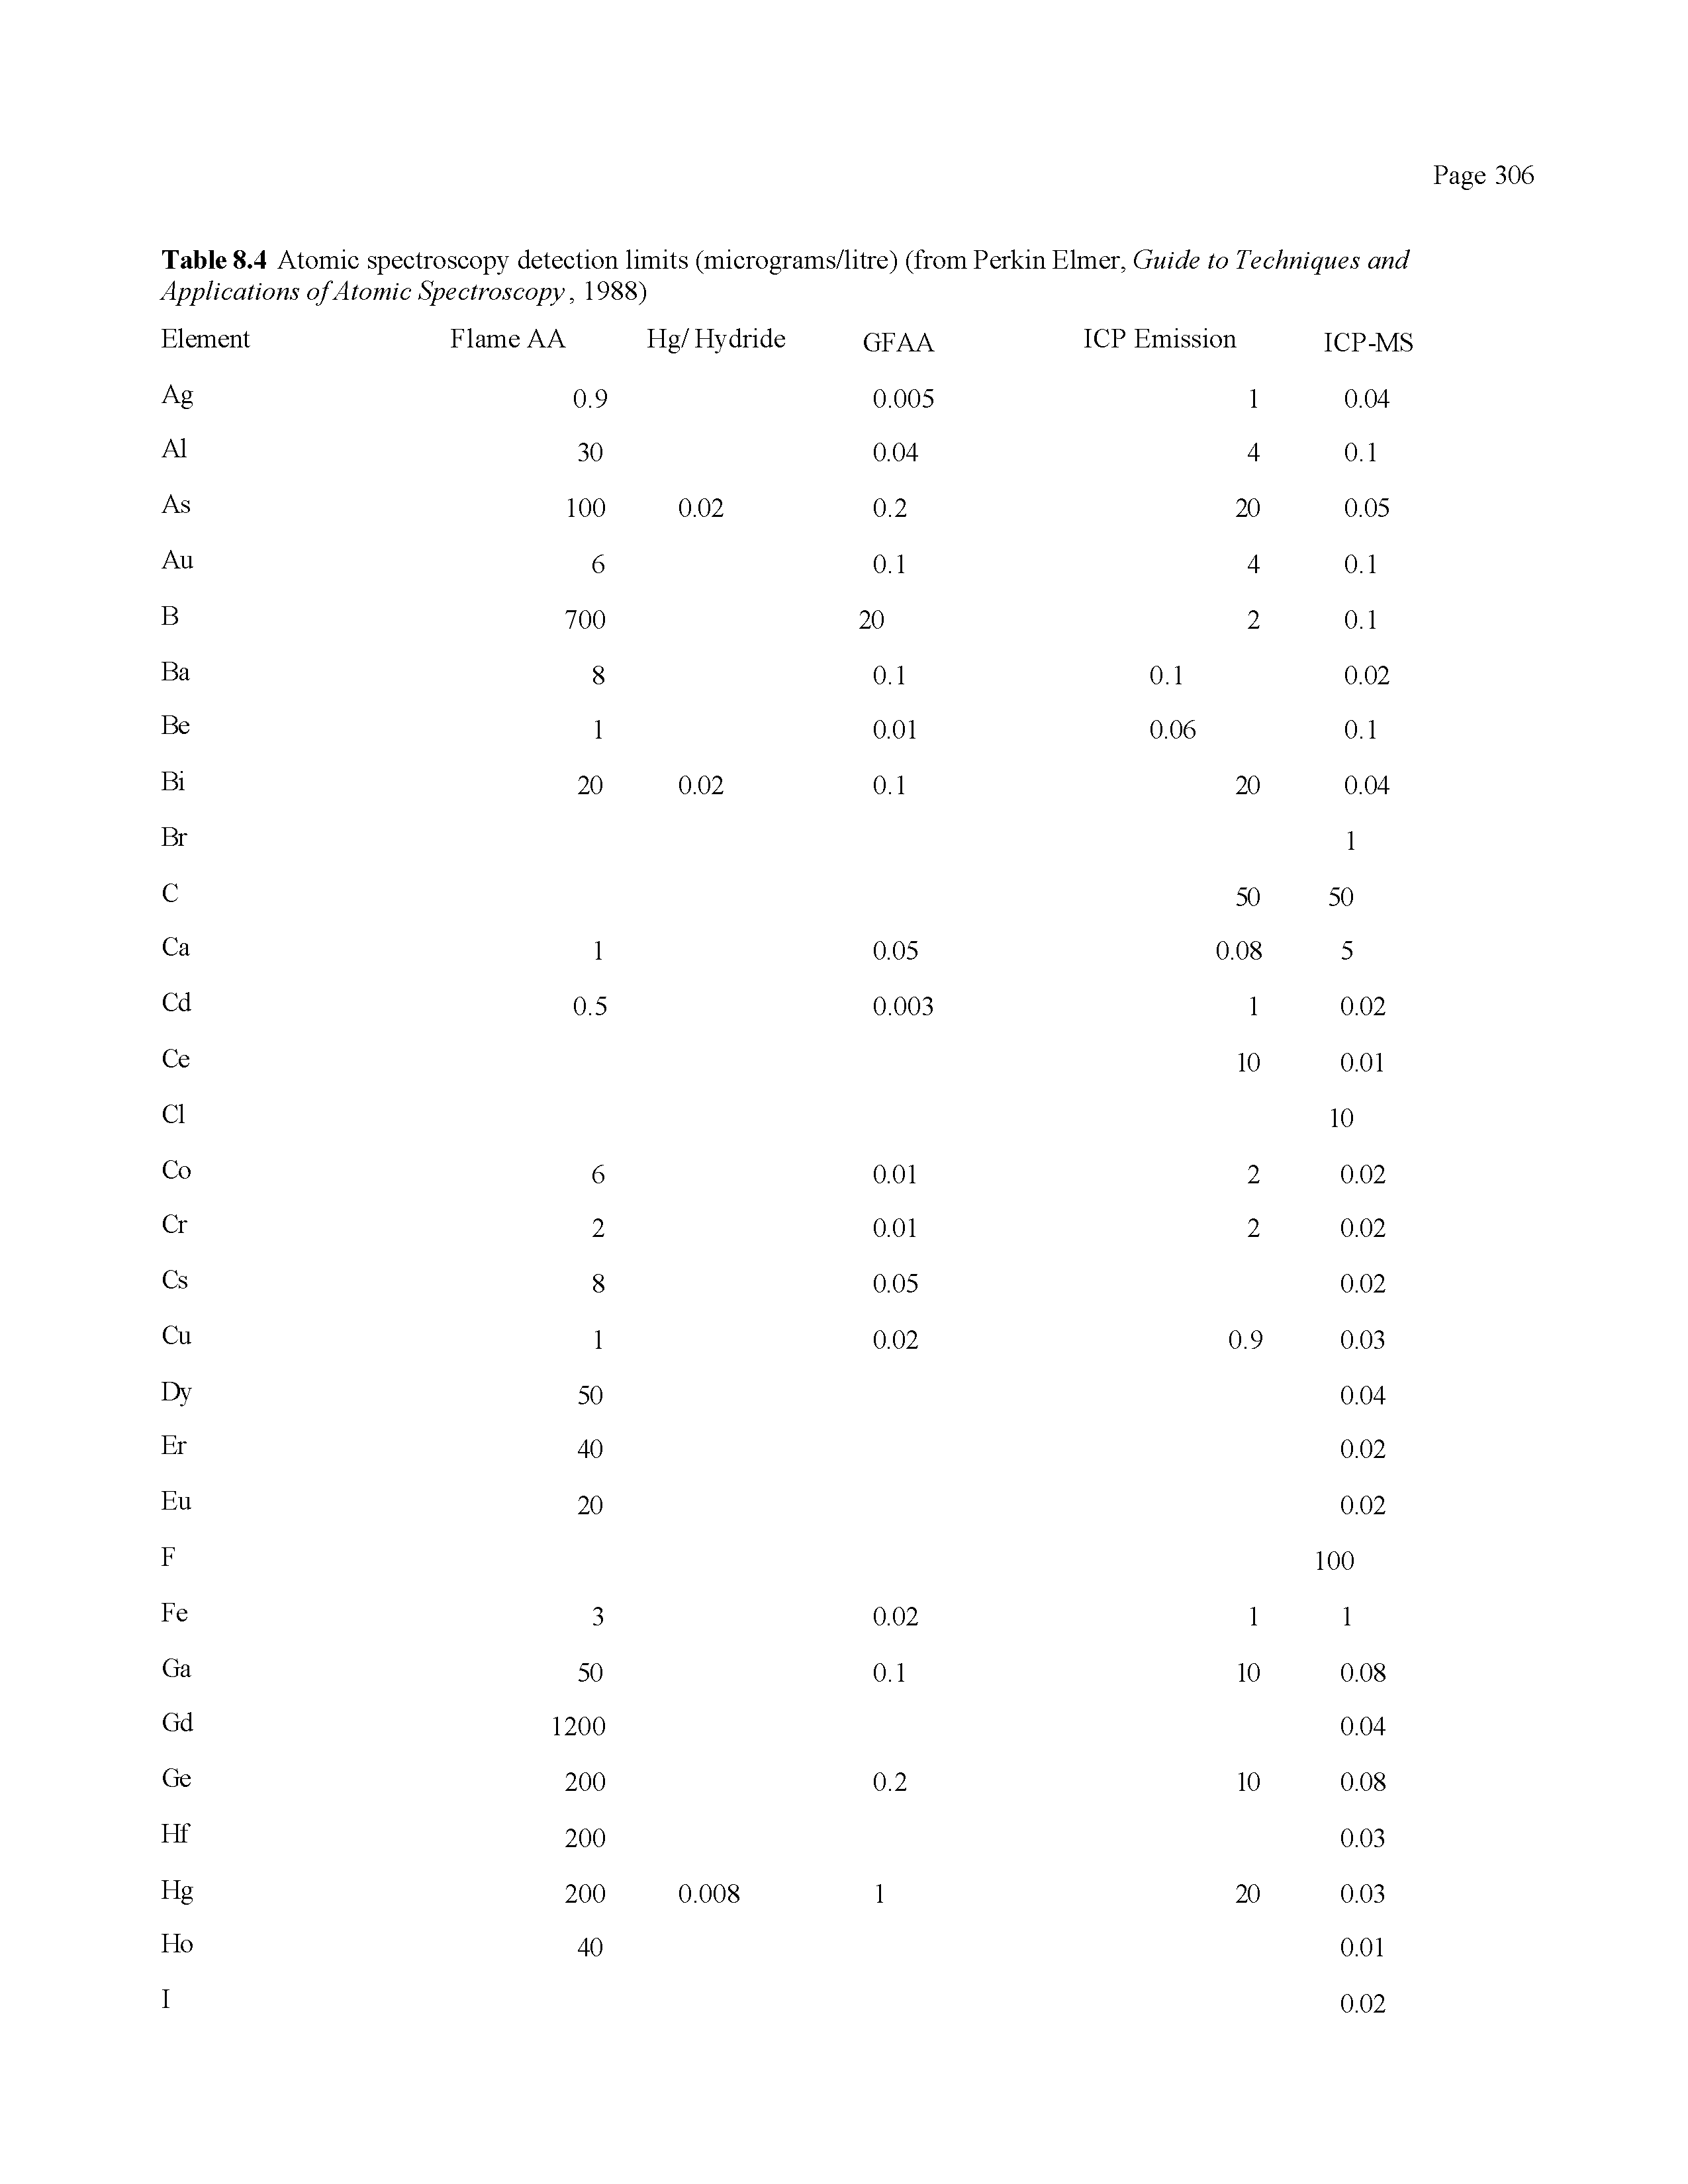 Table 8.4 Atomic spectroscopy detection limits (micrograms/litre) (from Perkin Elmer, Guide to Techniques and Applications of Atomic Spectroscopy, 1988)...